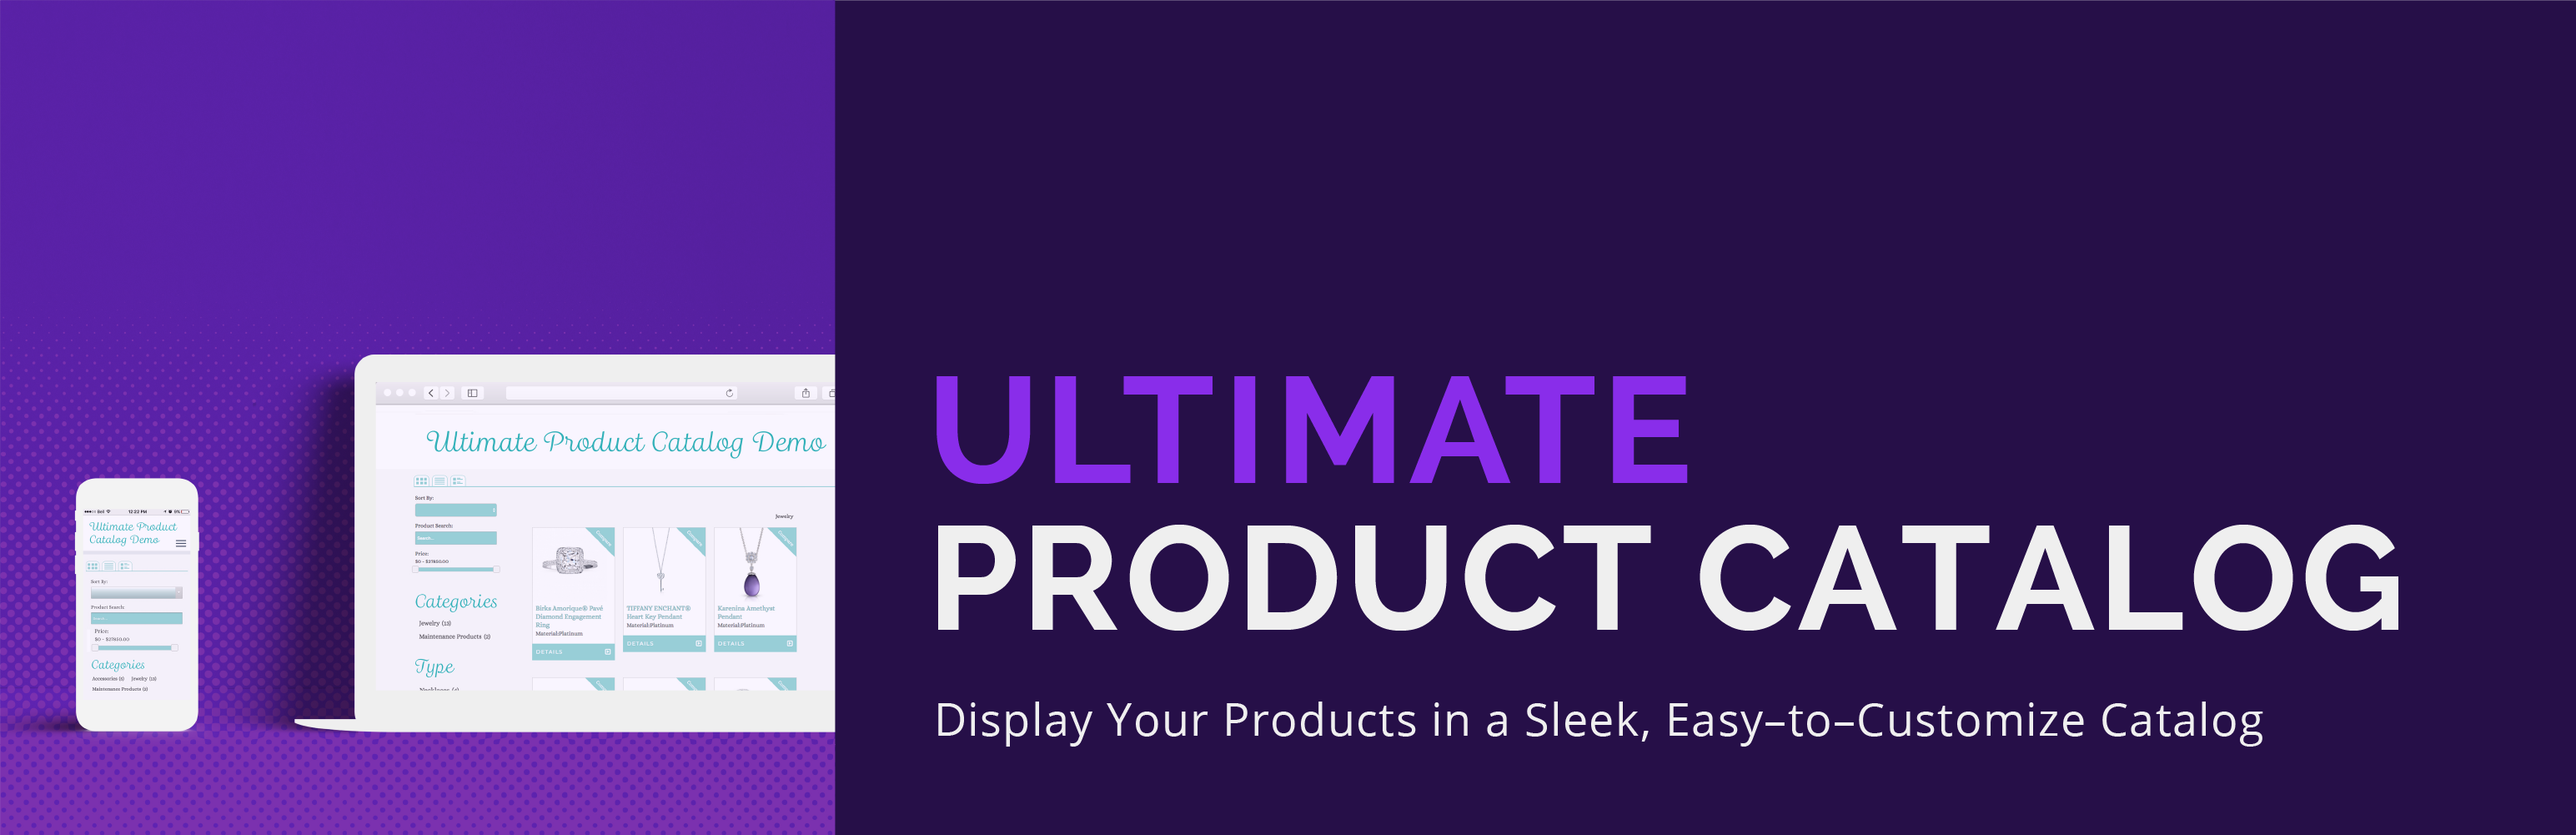 Product image for Ultimate Product Catalog.